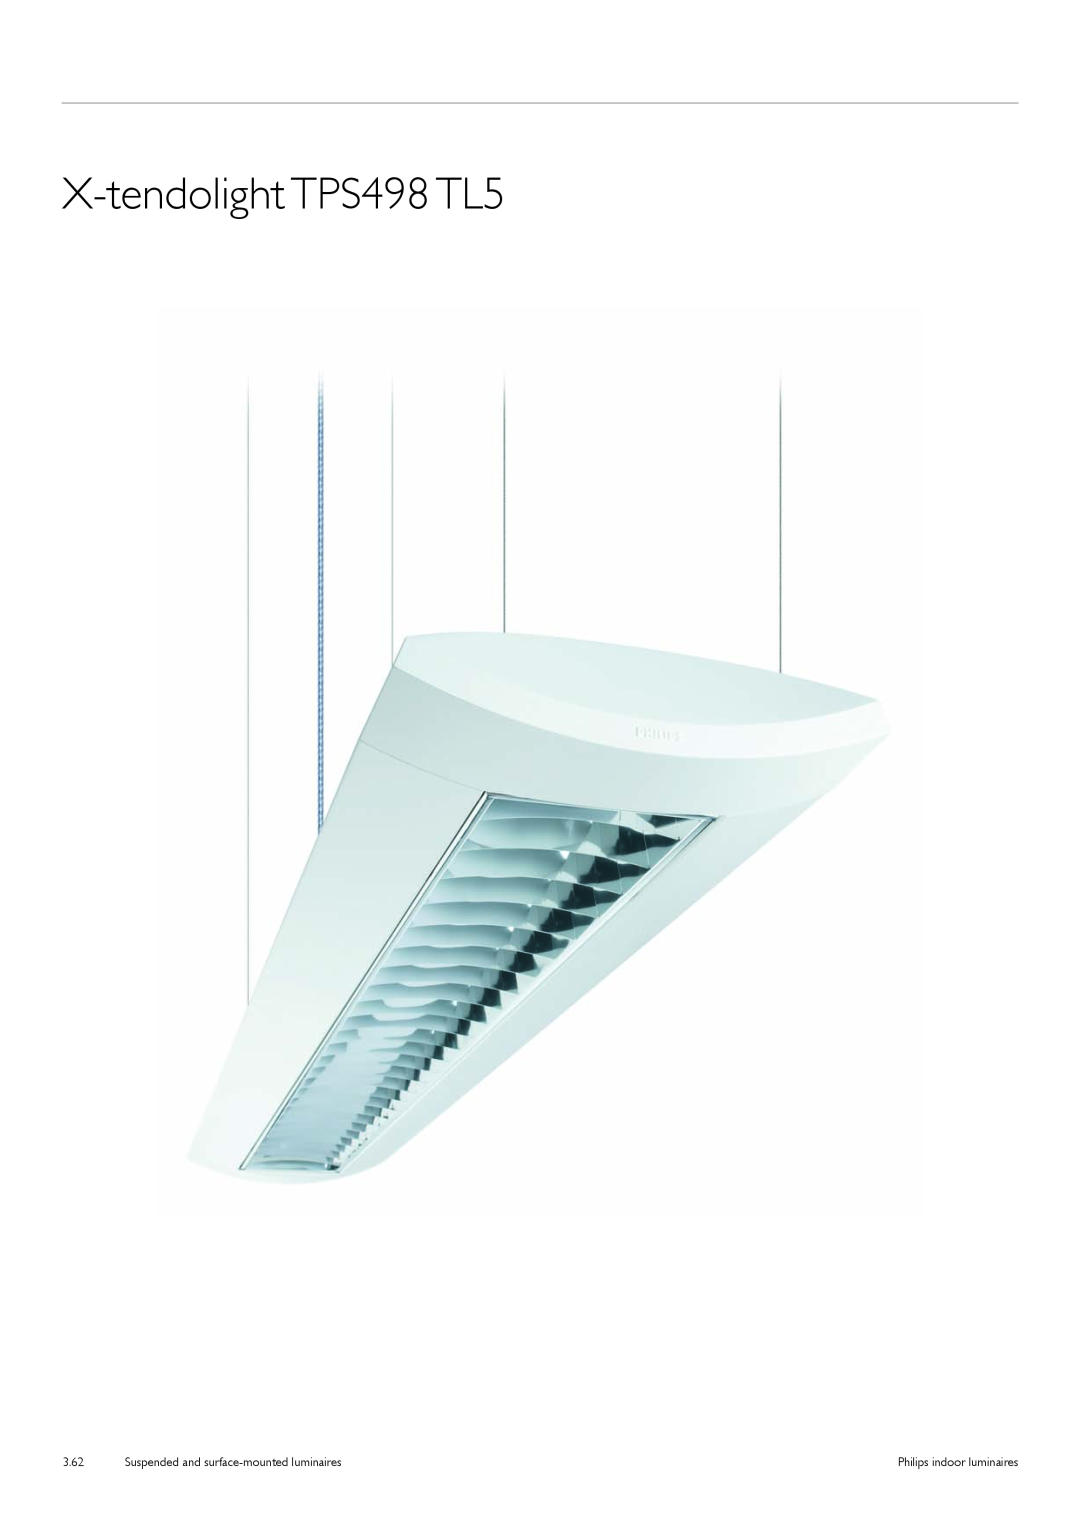 Philips TCS125 manual X-tendolightTPS498 TL5, Suspended and surface-mountedluminaires, 3.62, Philips indoor luminaires 